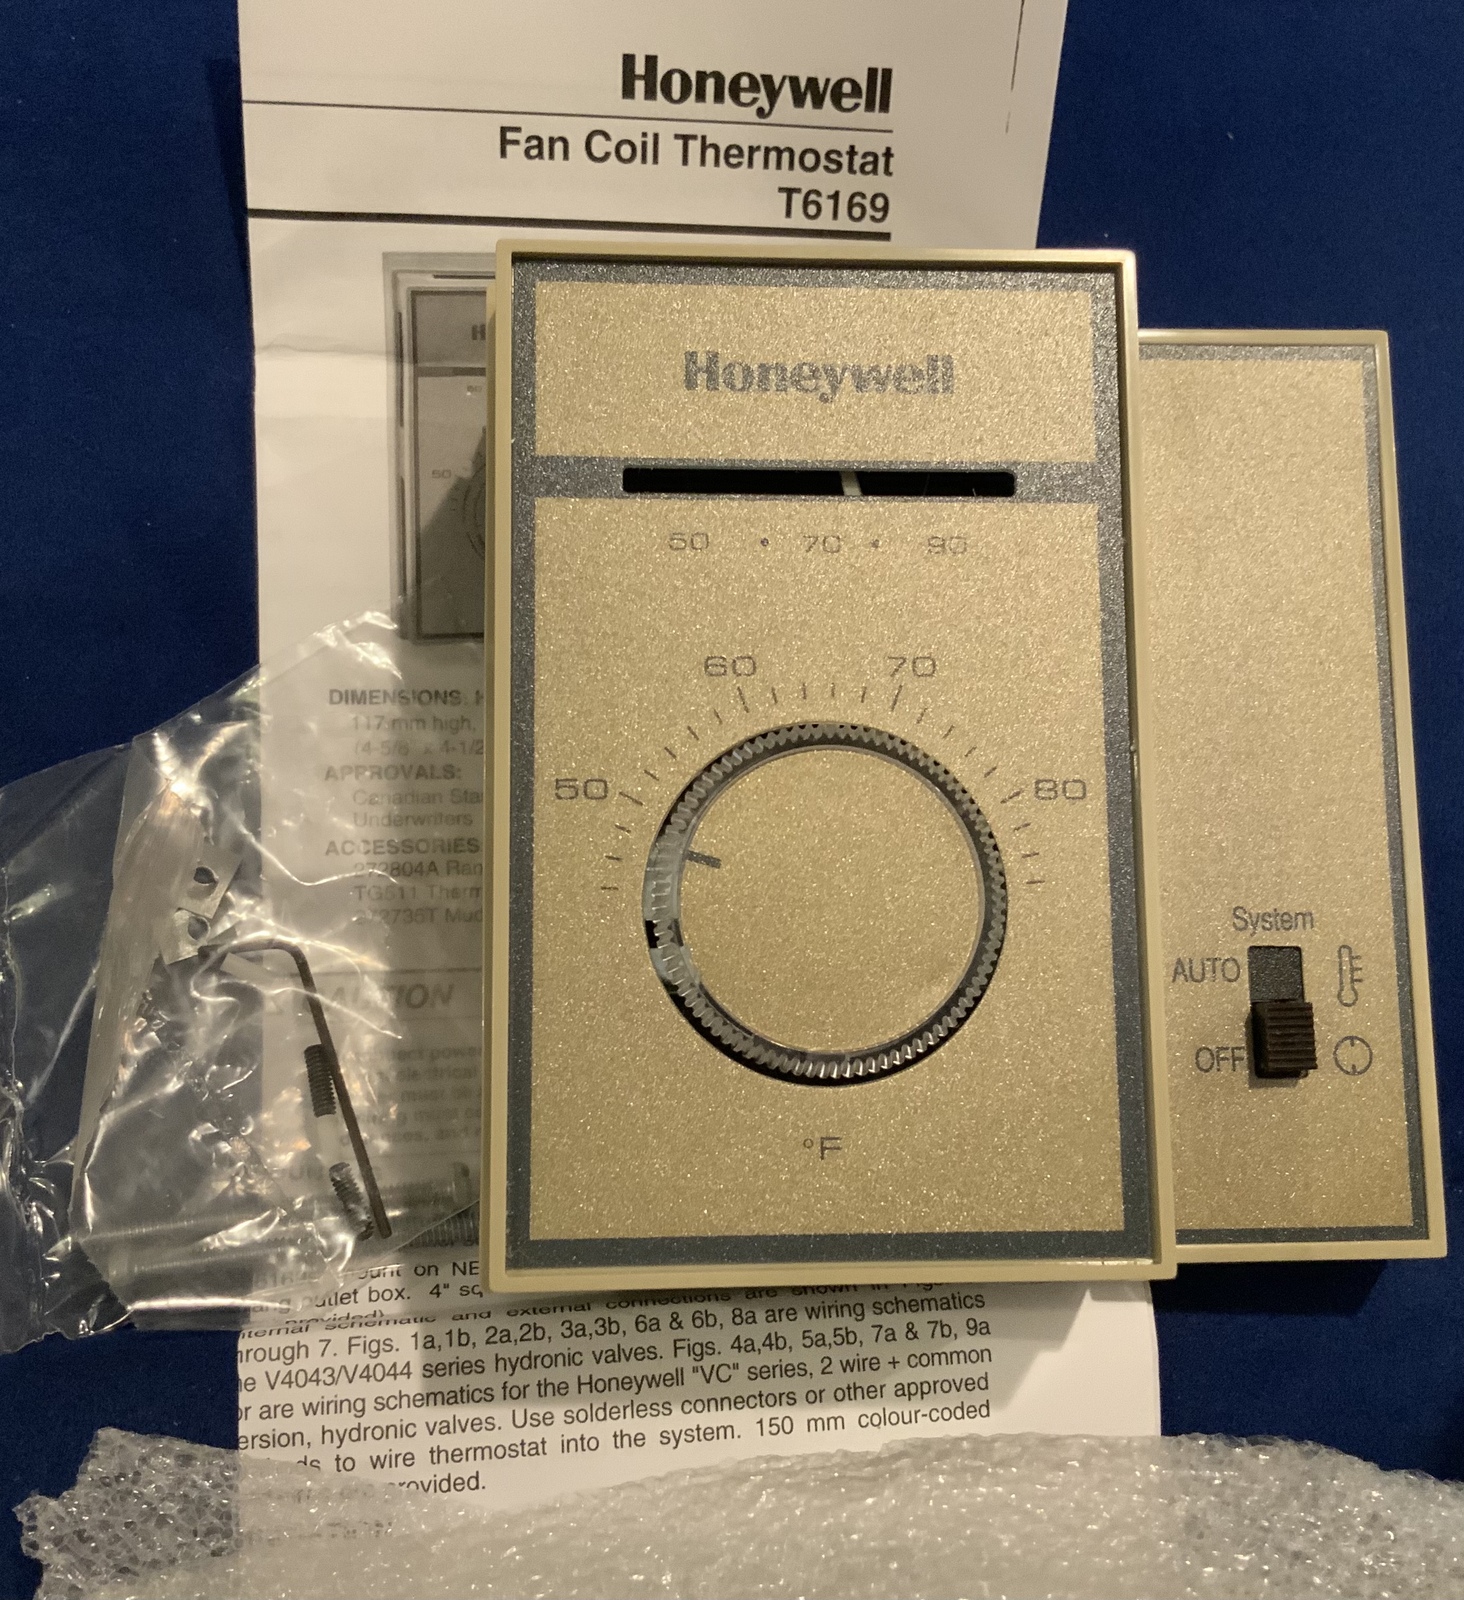 Automation and Control Solutions HONEYWELL, T69169C 4015, fan coil Thermostat  - $25.59